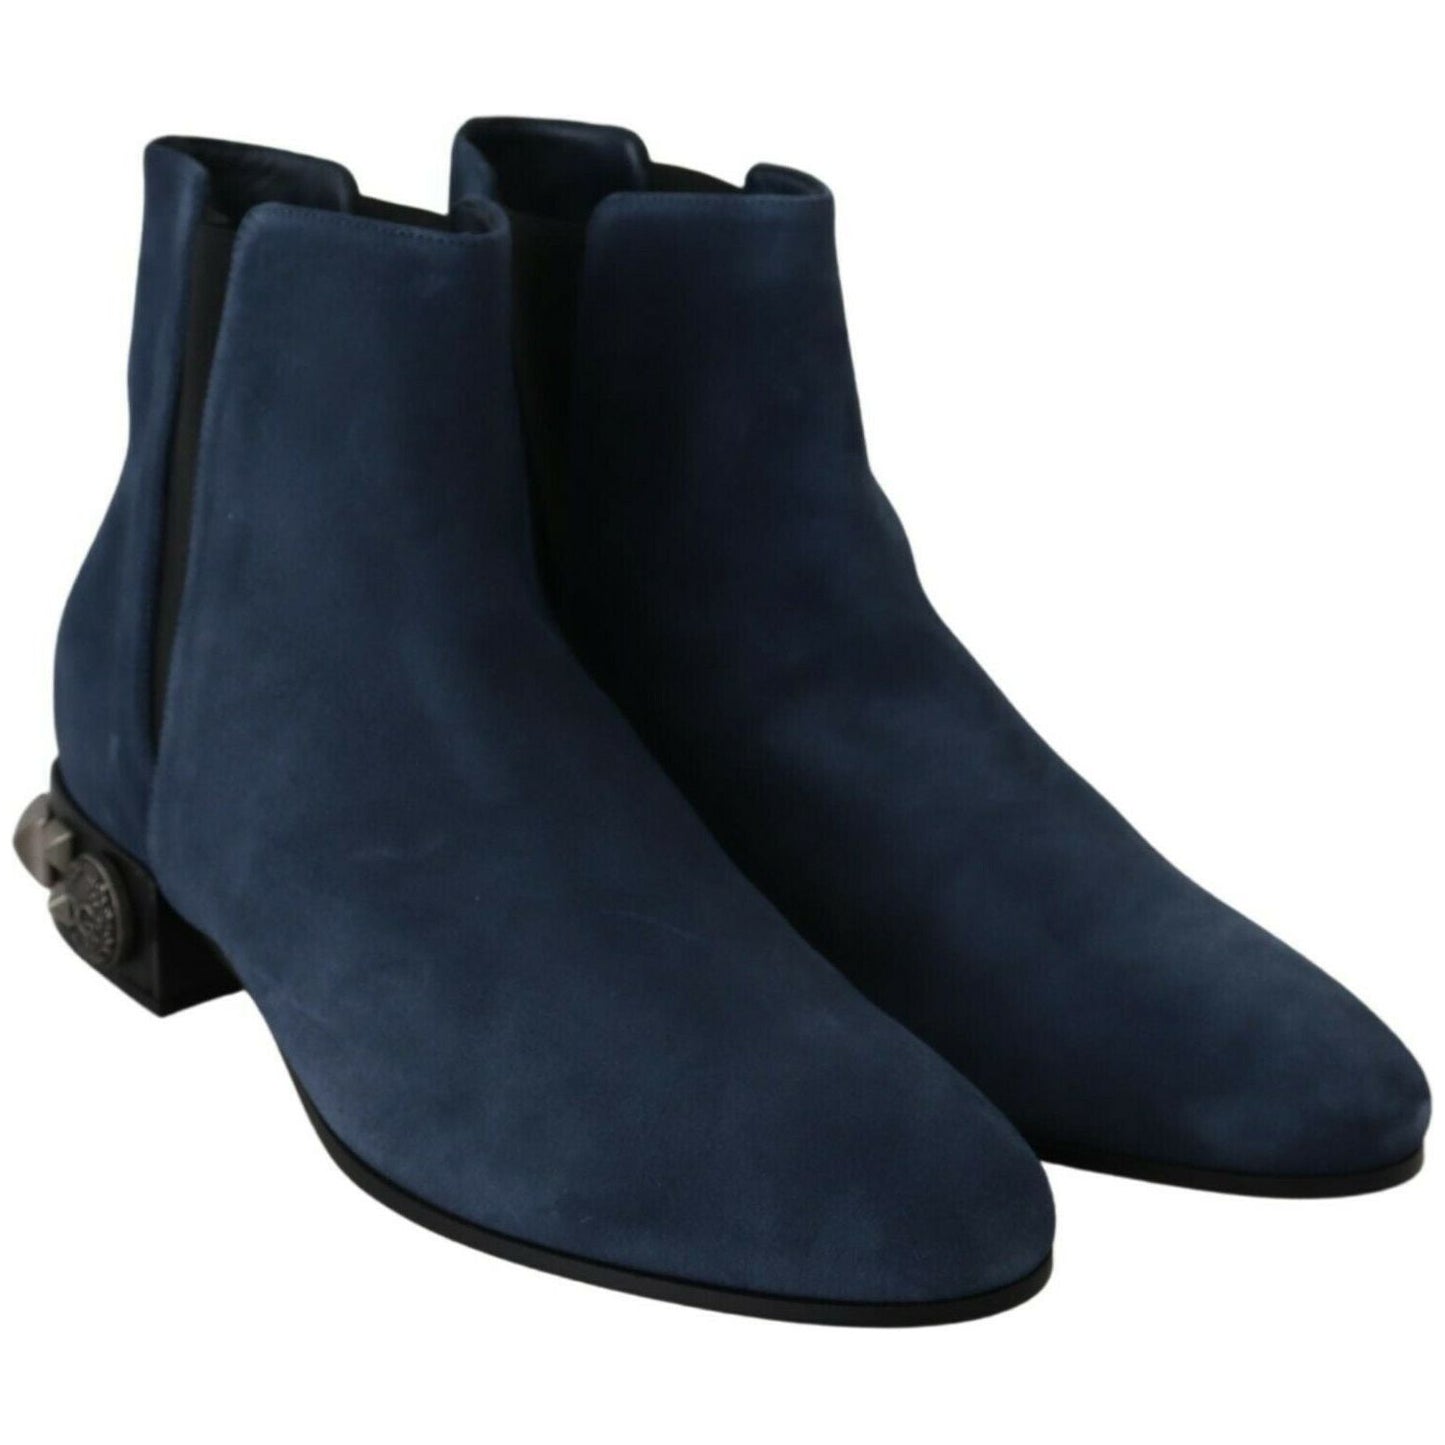 Dolce & Gabbana Chic Blue Suede Mid-Calf Boots with Stud Details blue-suede-embellished-studded-boots-shoes WOMAN BOOTS s-l1600-2022-06-30T120606.411-9fca1886-5c4.jpg